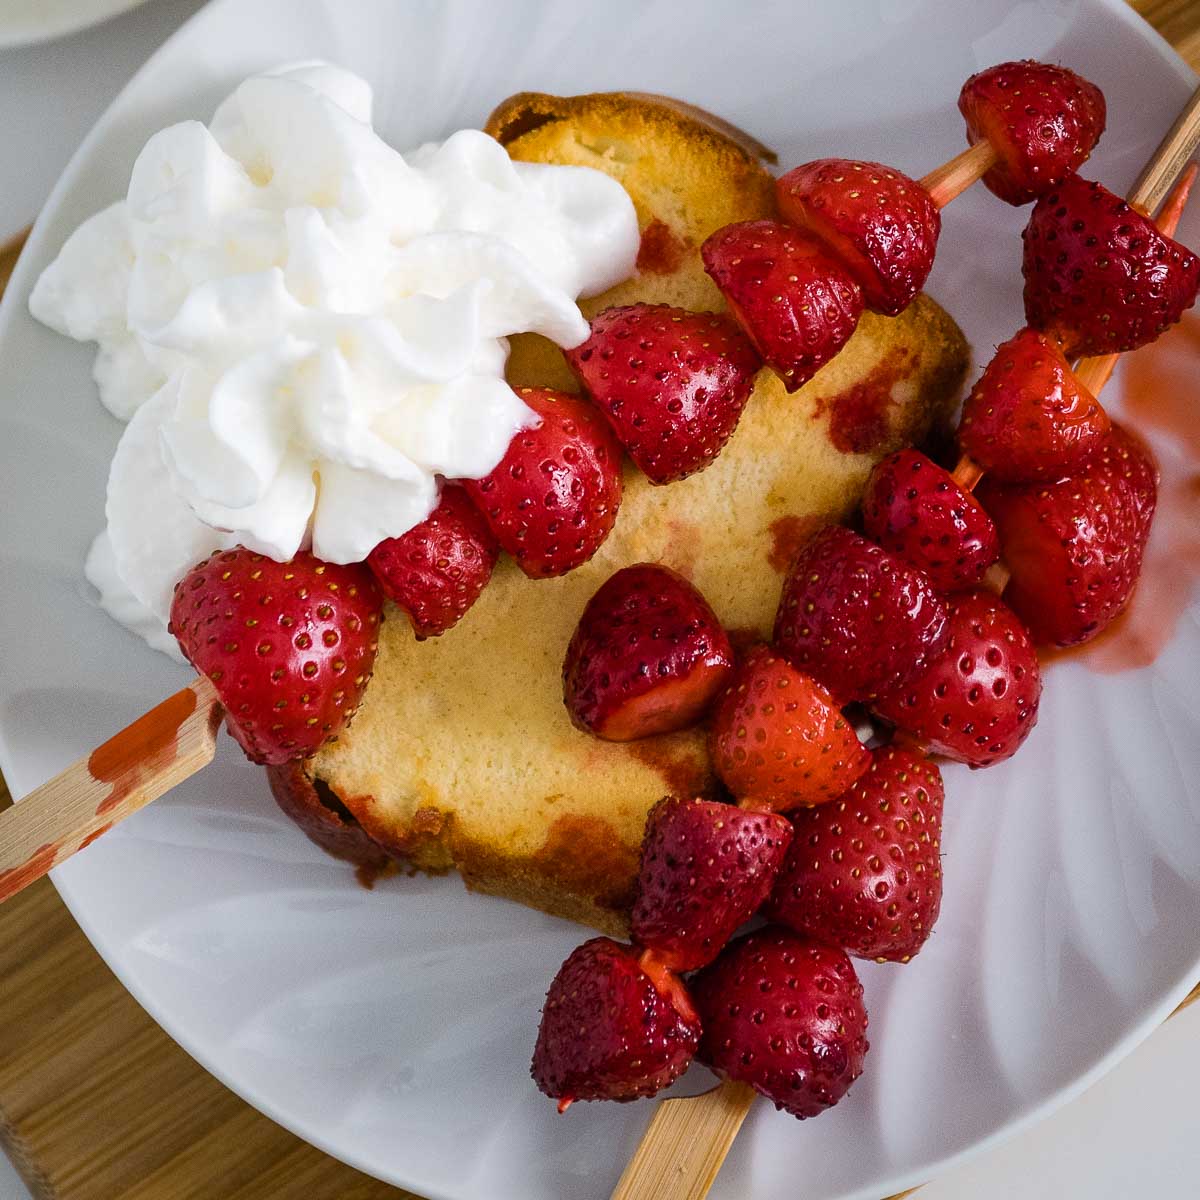 Air Fryer Strawberry Shortcake with whipped cream on a plate.